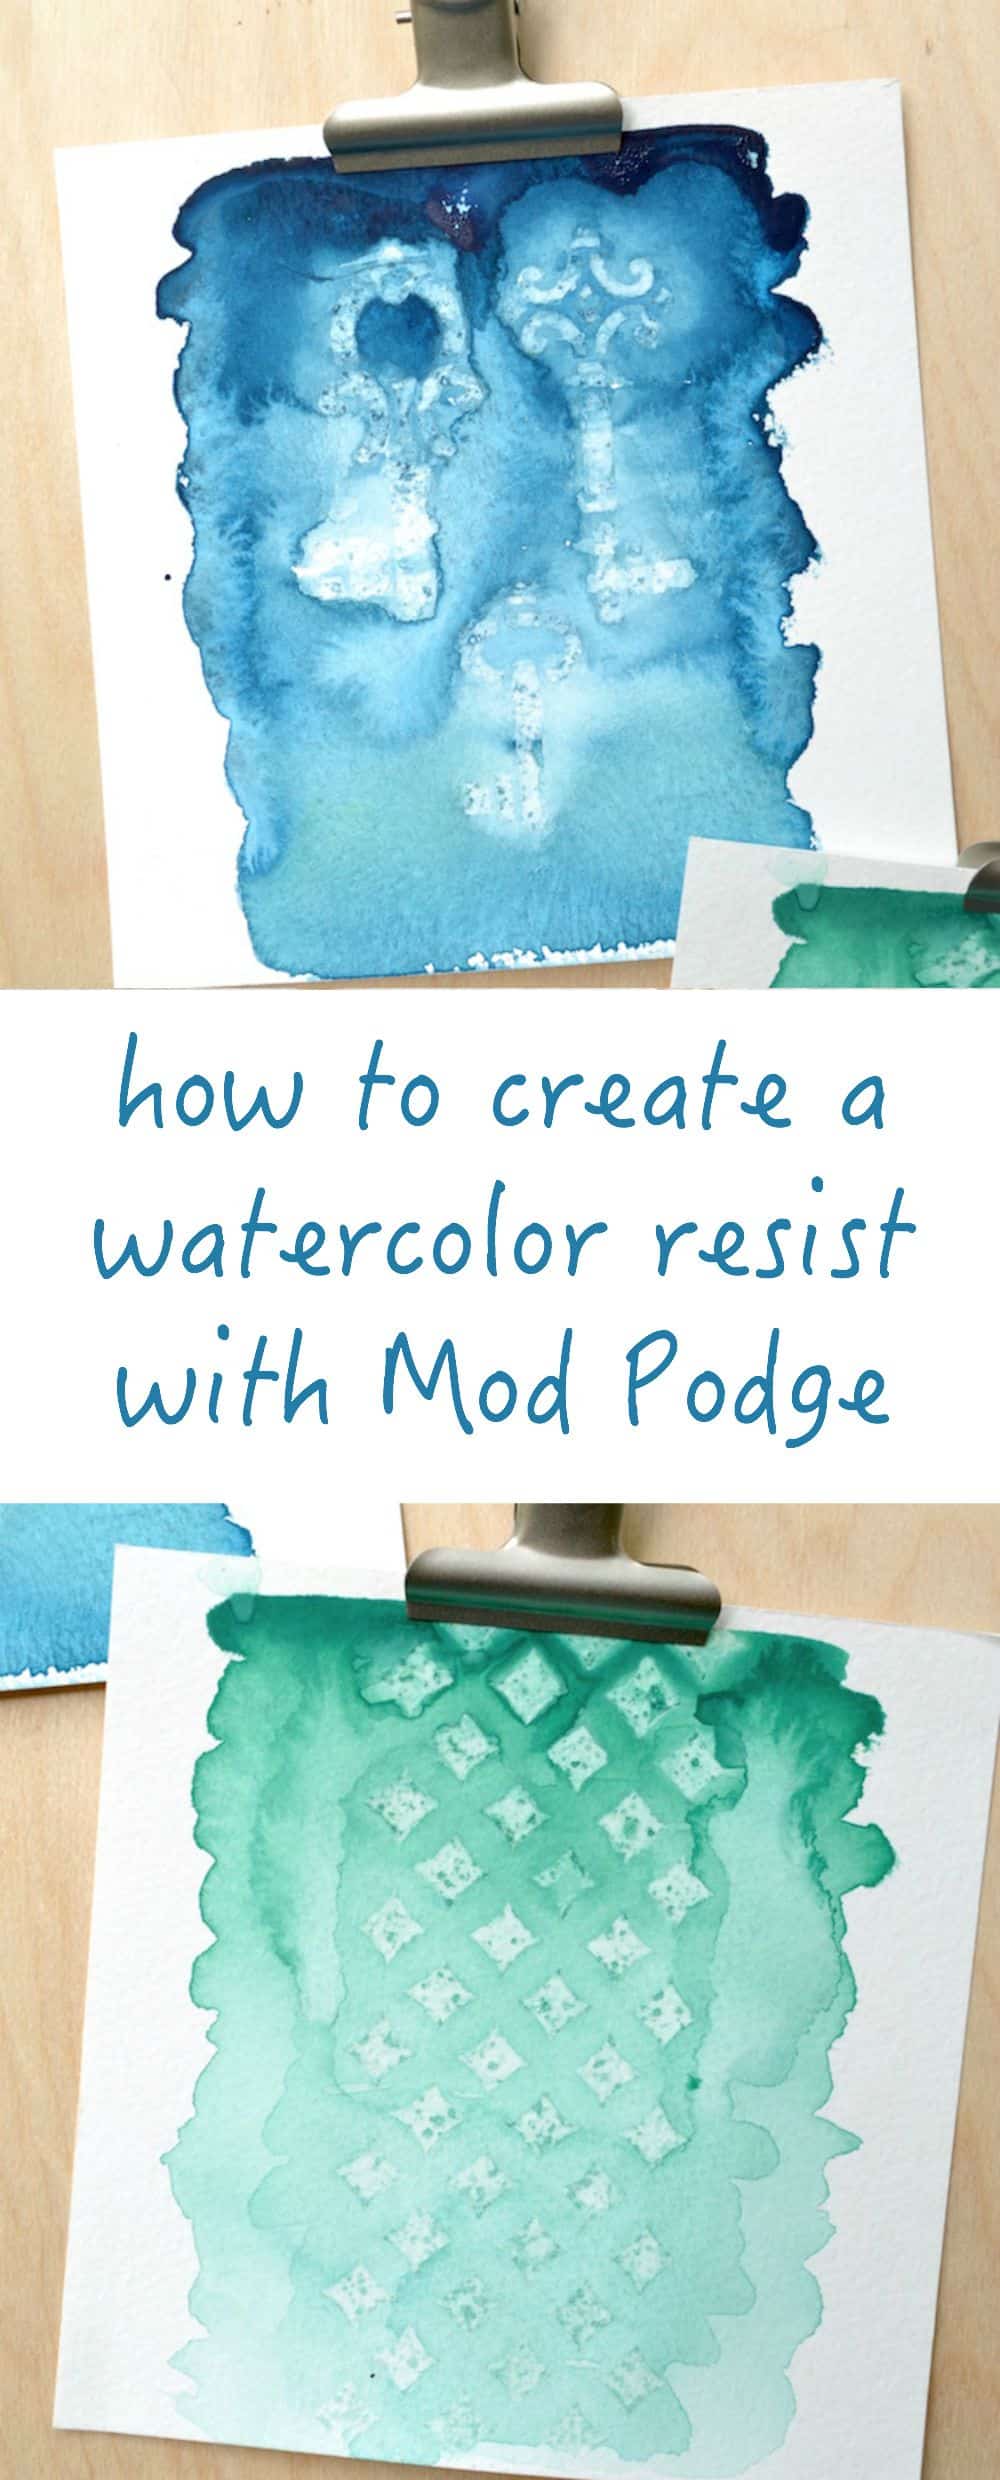 how to create a watercolor resist with Mod Podge